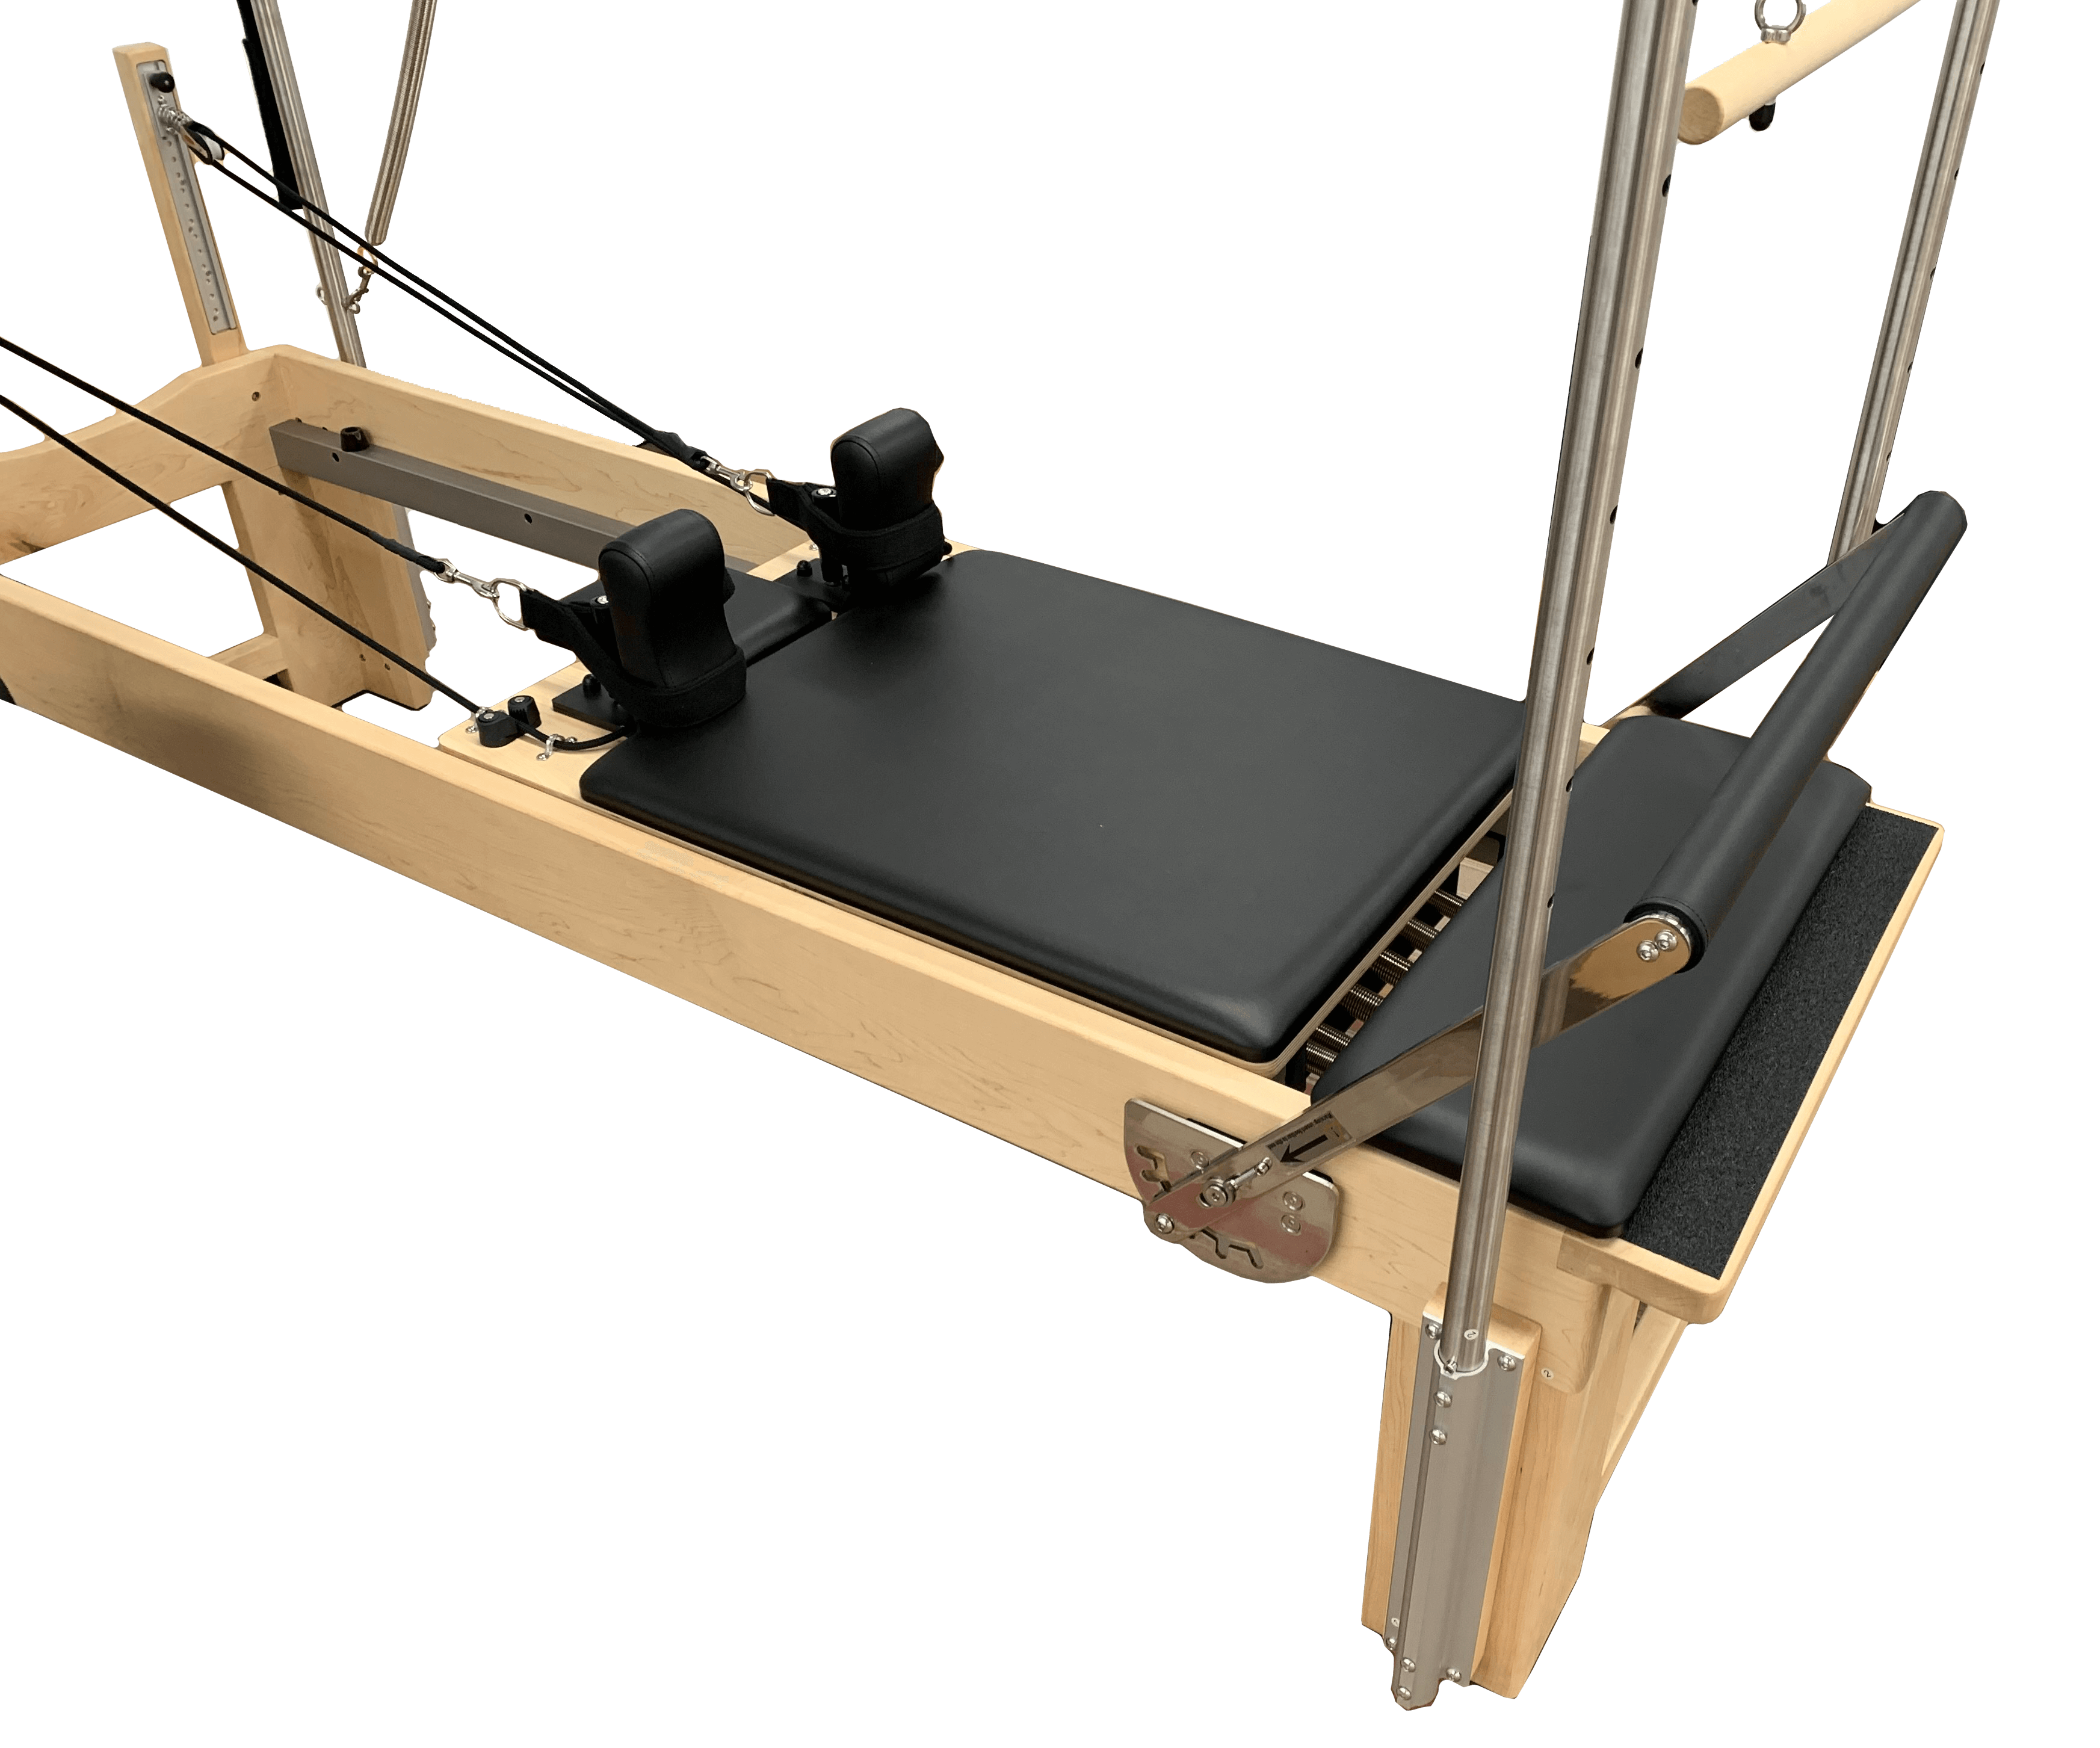 Buy Trapeze Pilates Reformers Online - Motion Pilates Full Trapeze